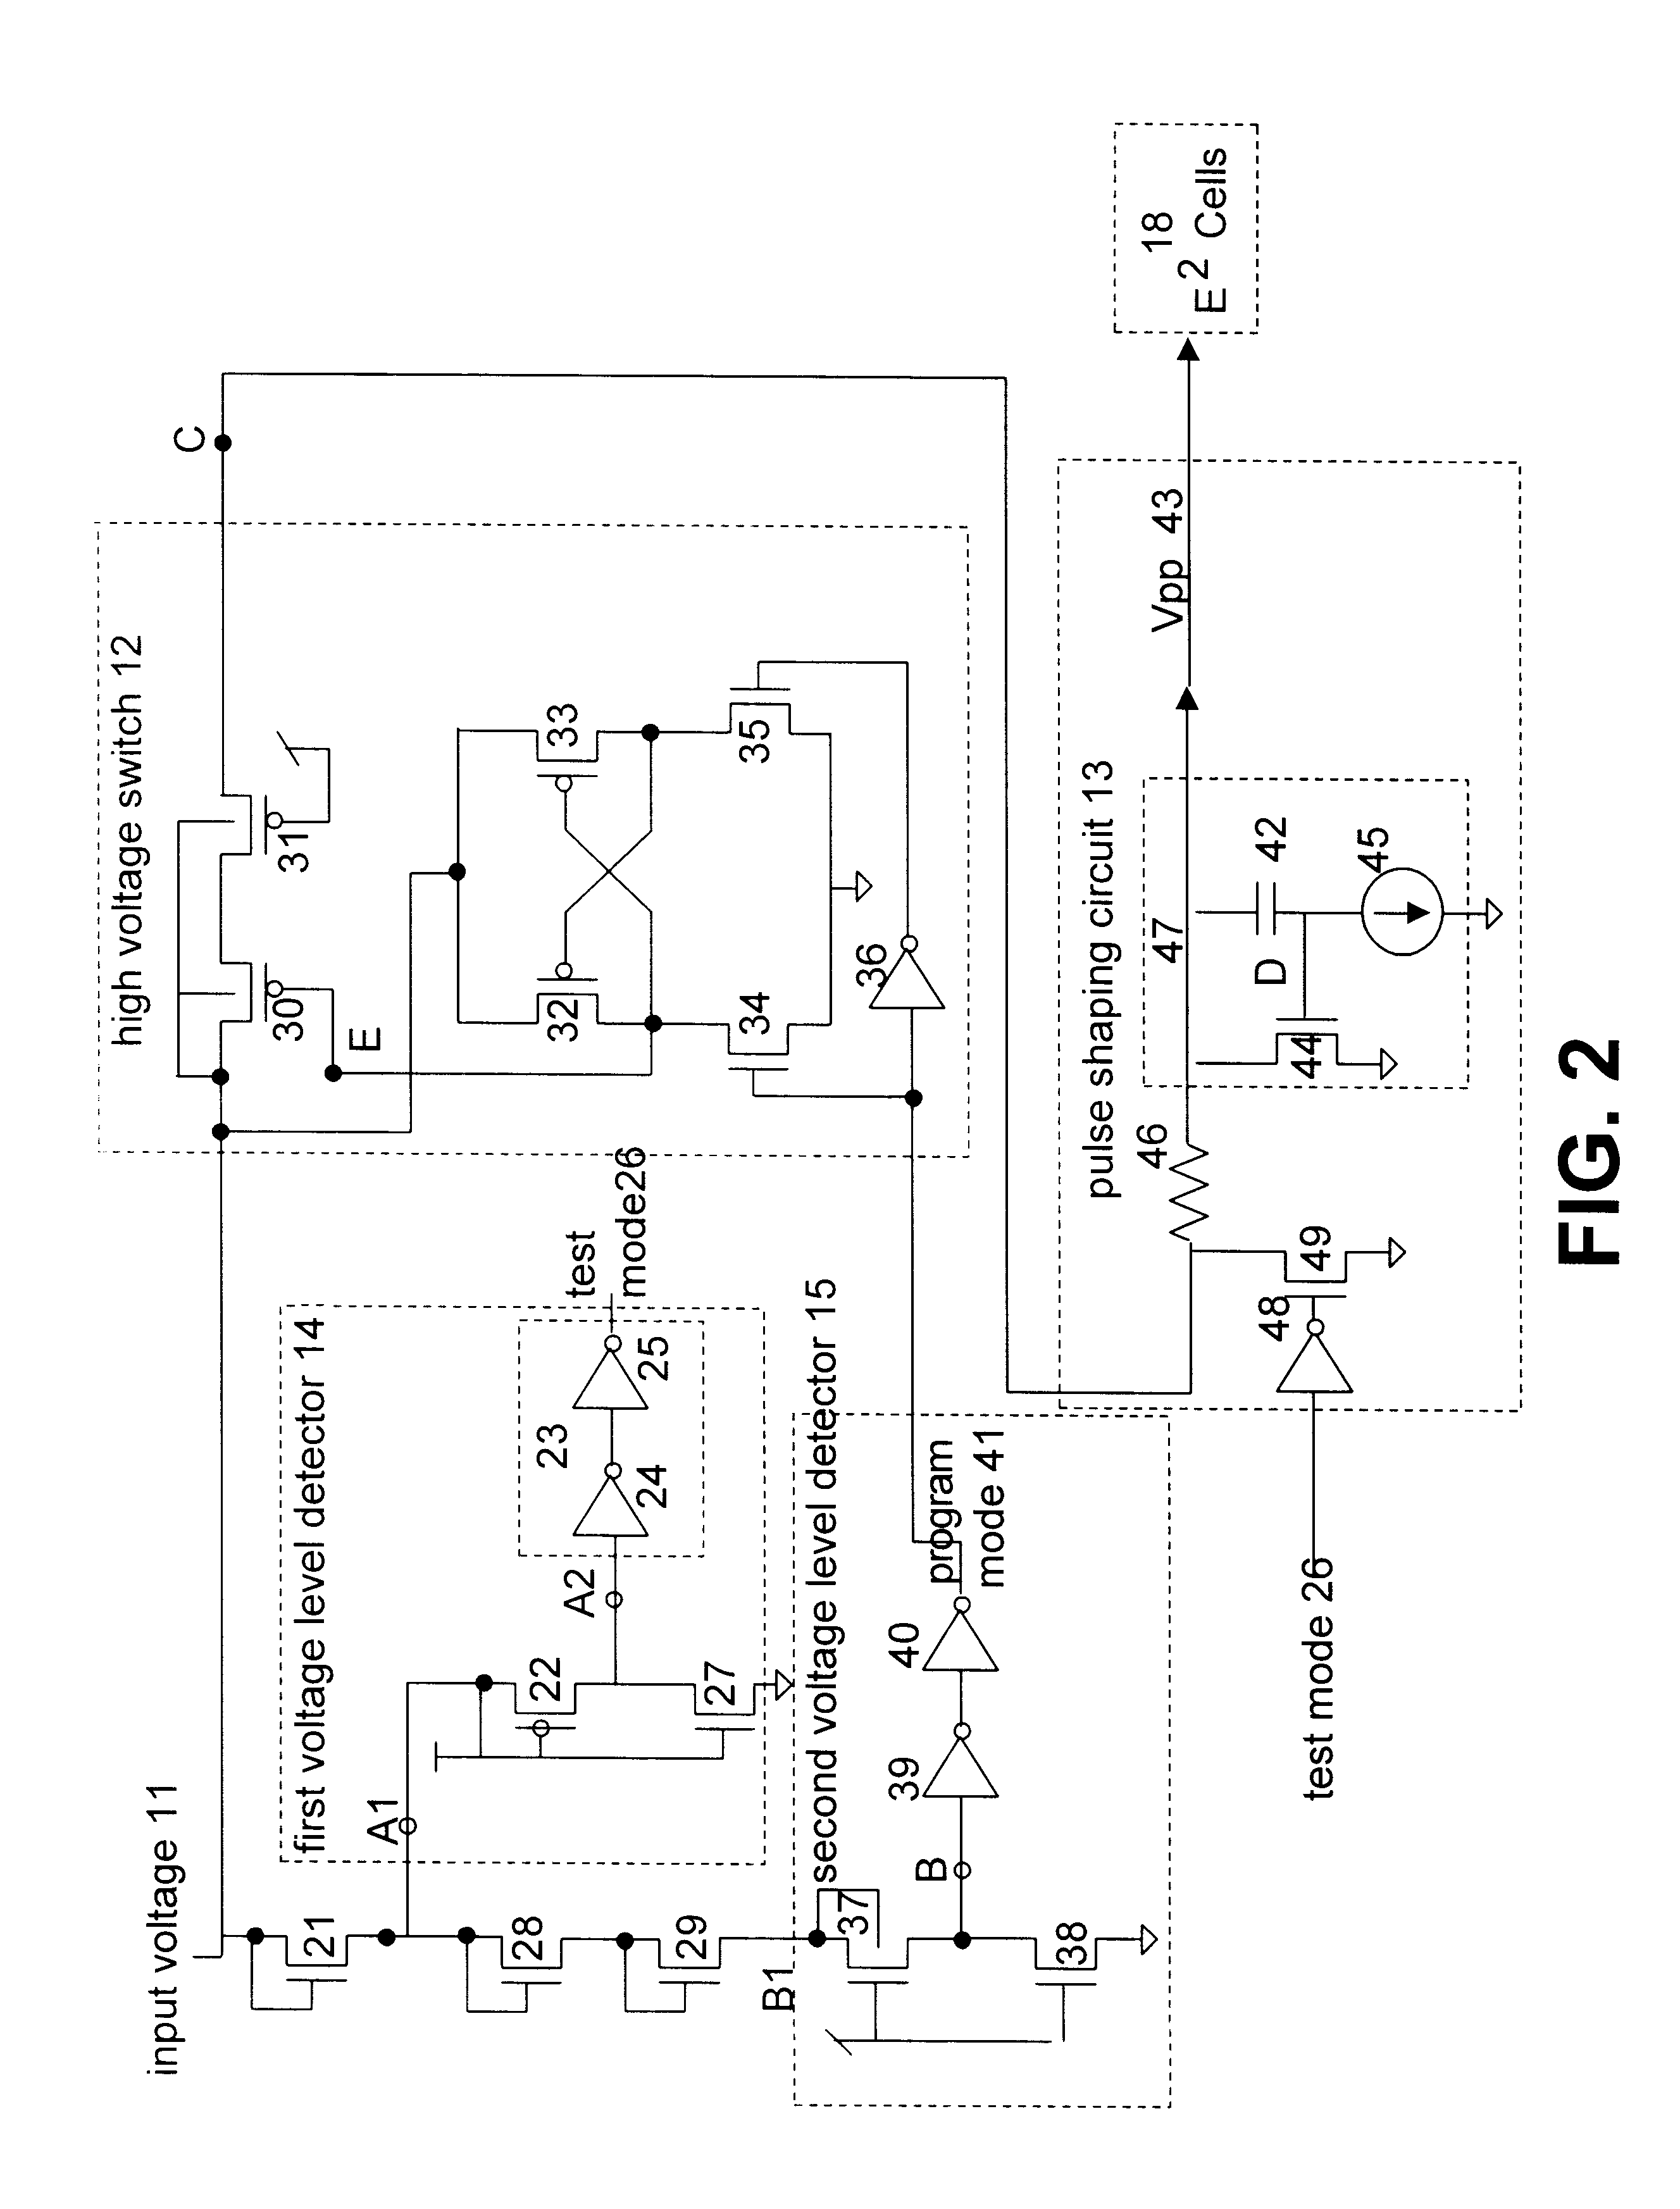 Method and system for pulse shaping in test and program modes